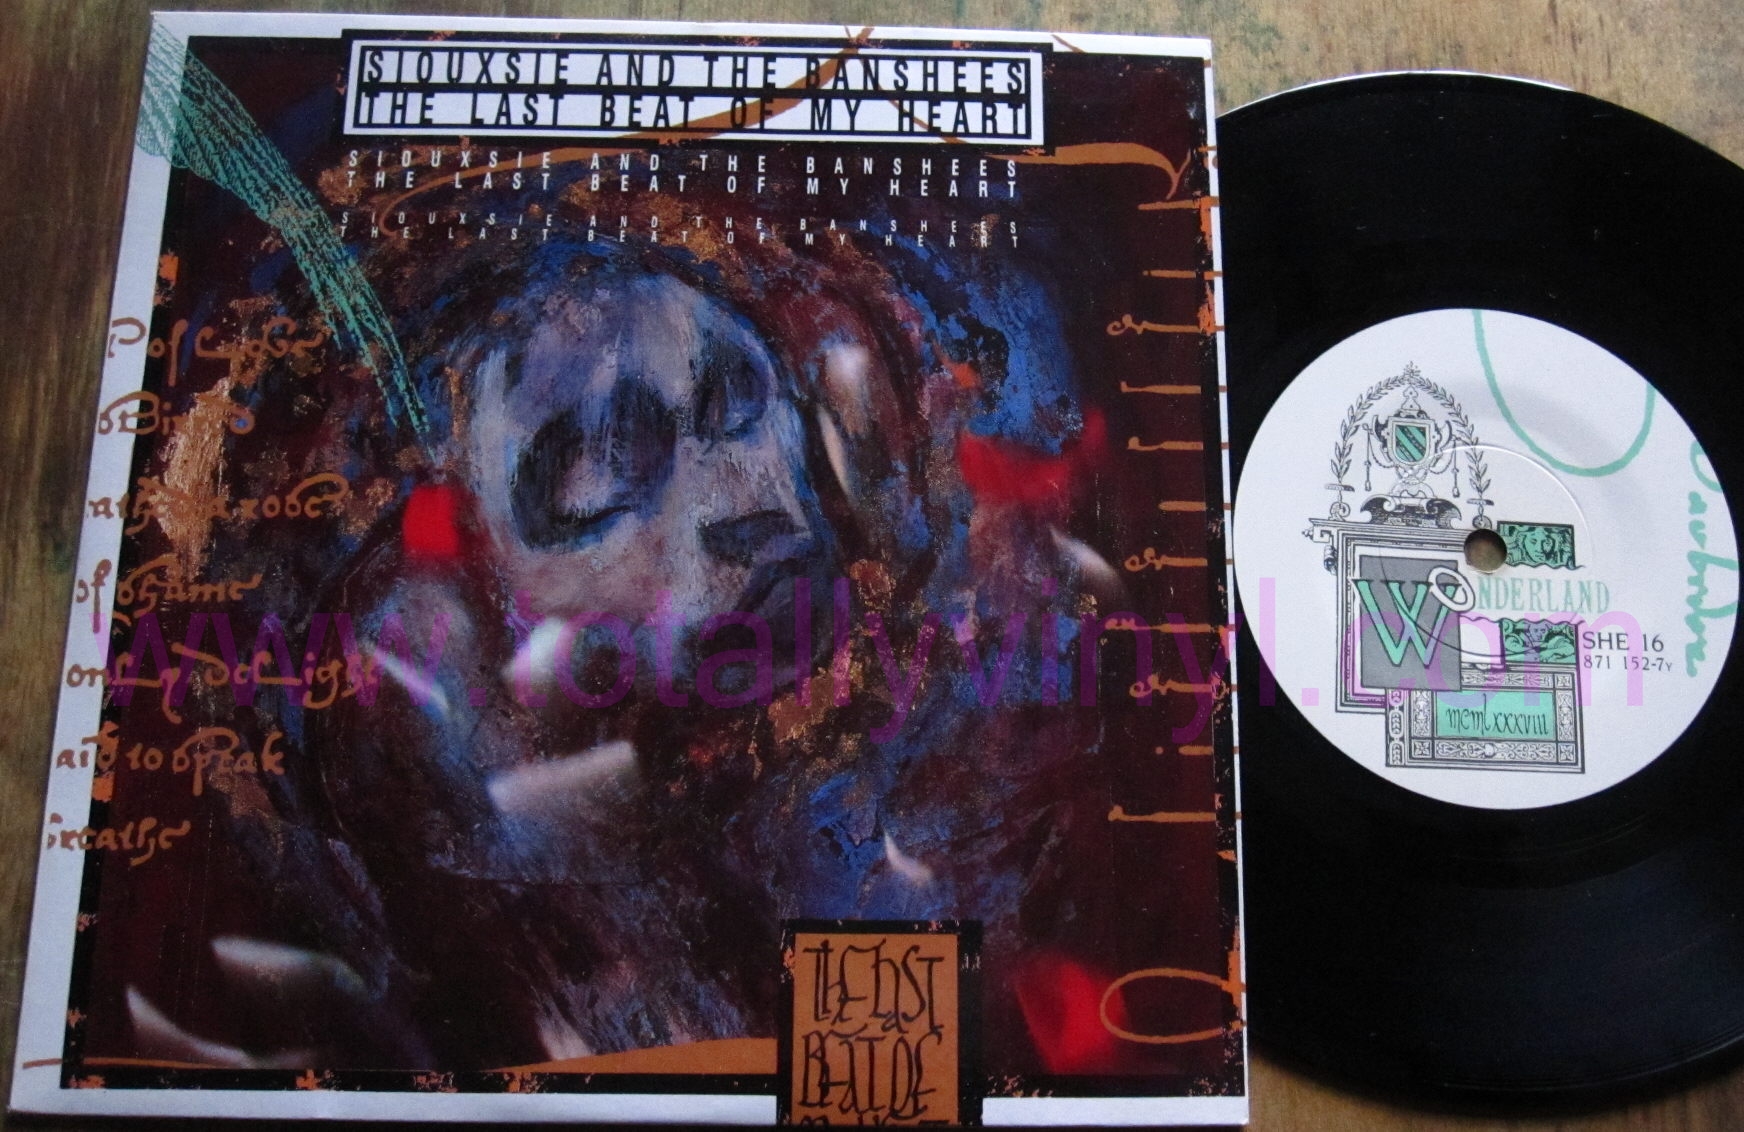 Totally Vinyl Records || Siouxsie and the Banshees - The last beat of ...